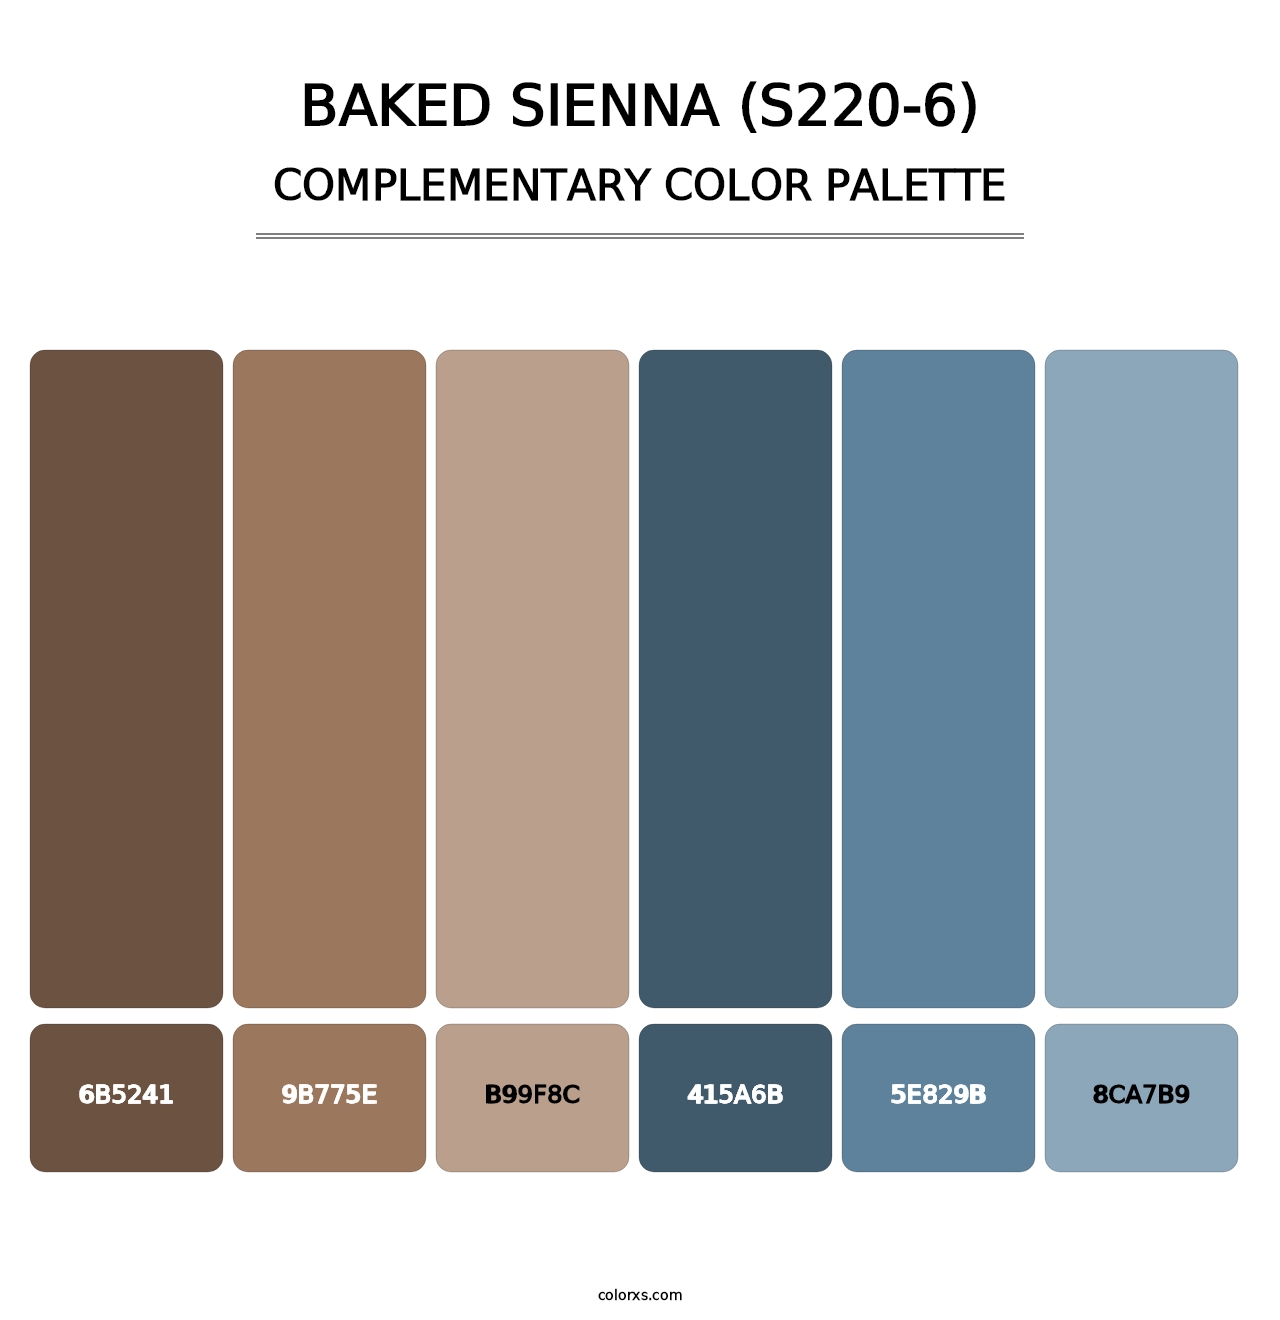 Baked Sienna (S220-6) - Complementary Color Palette